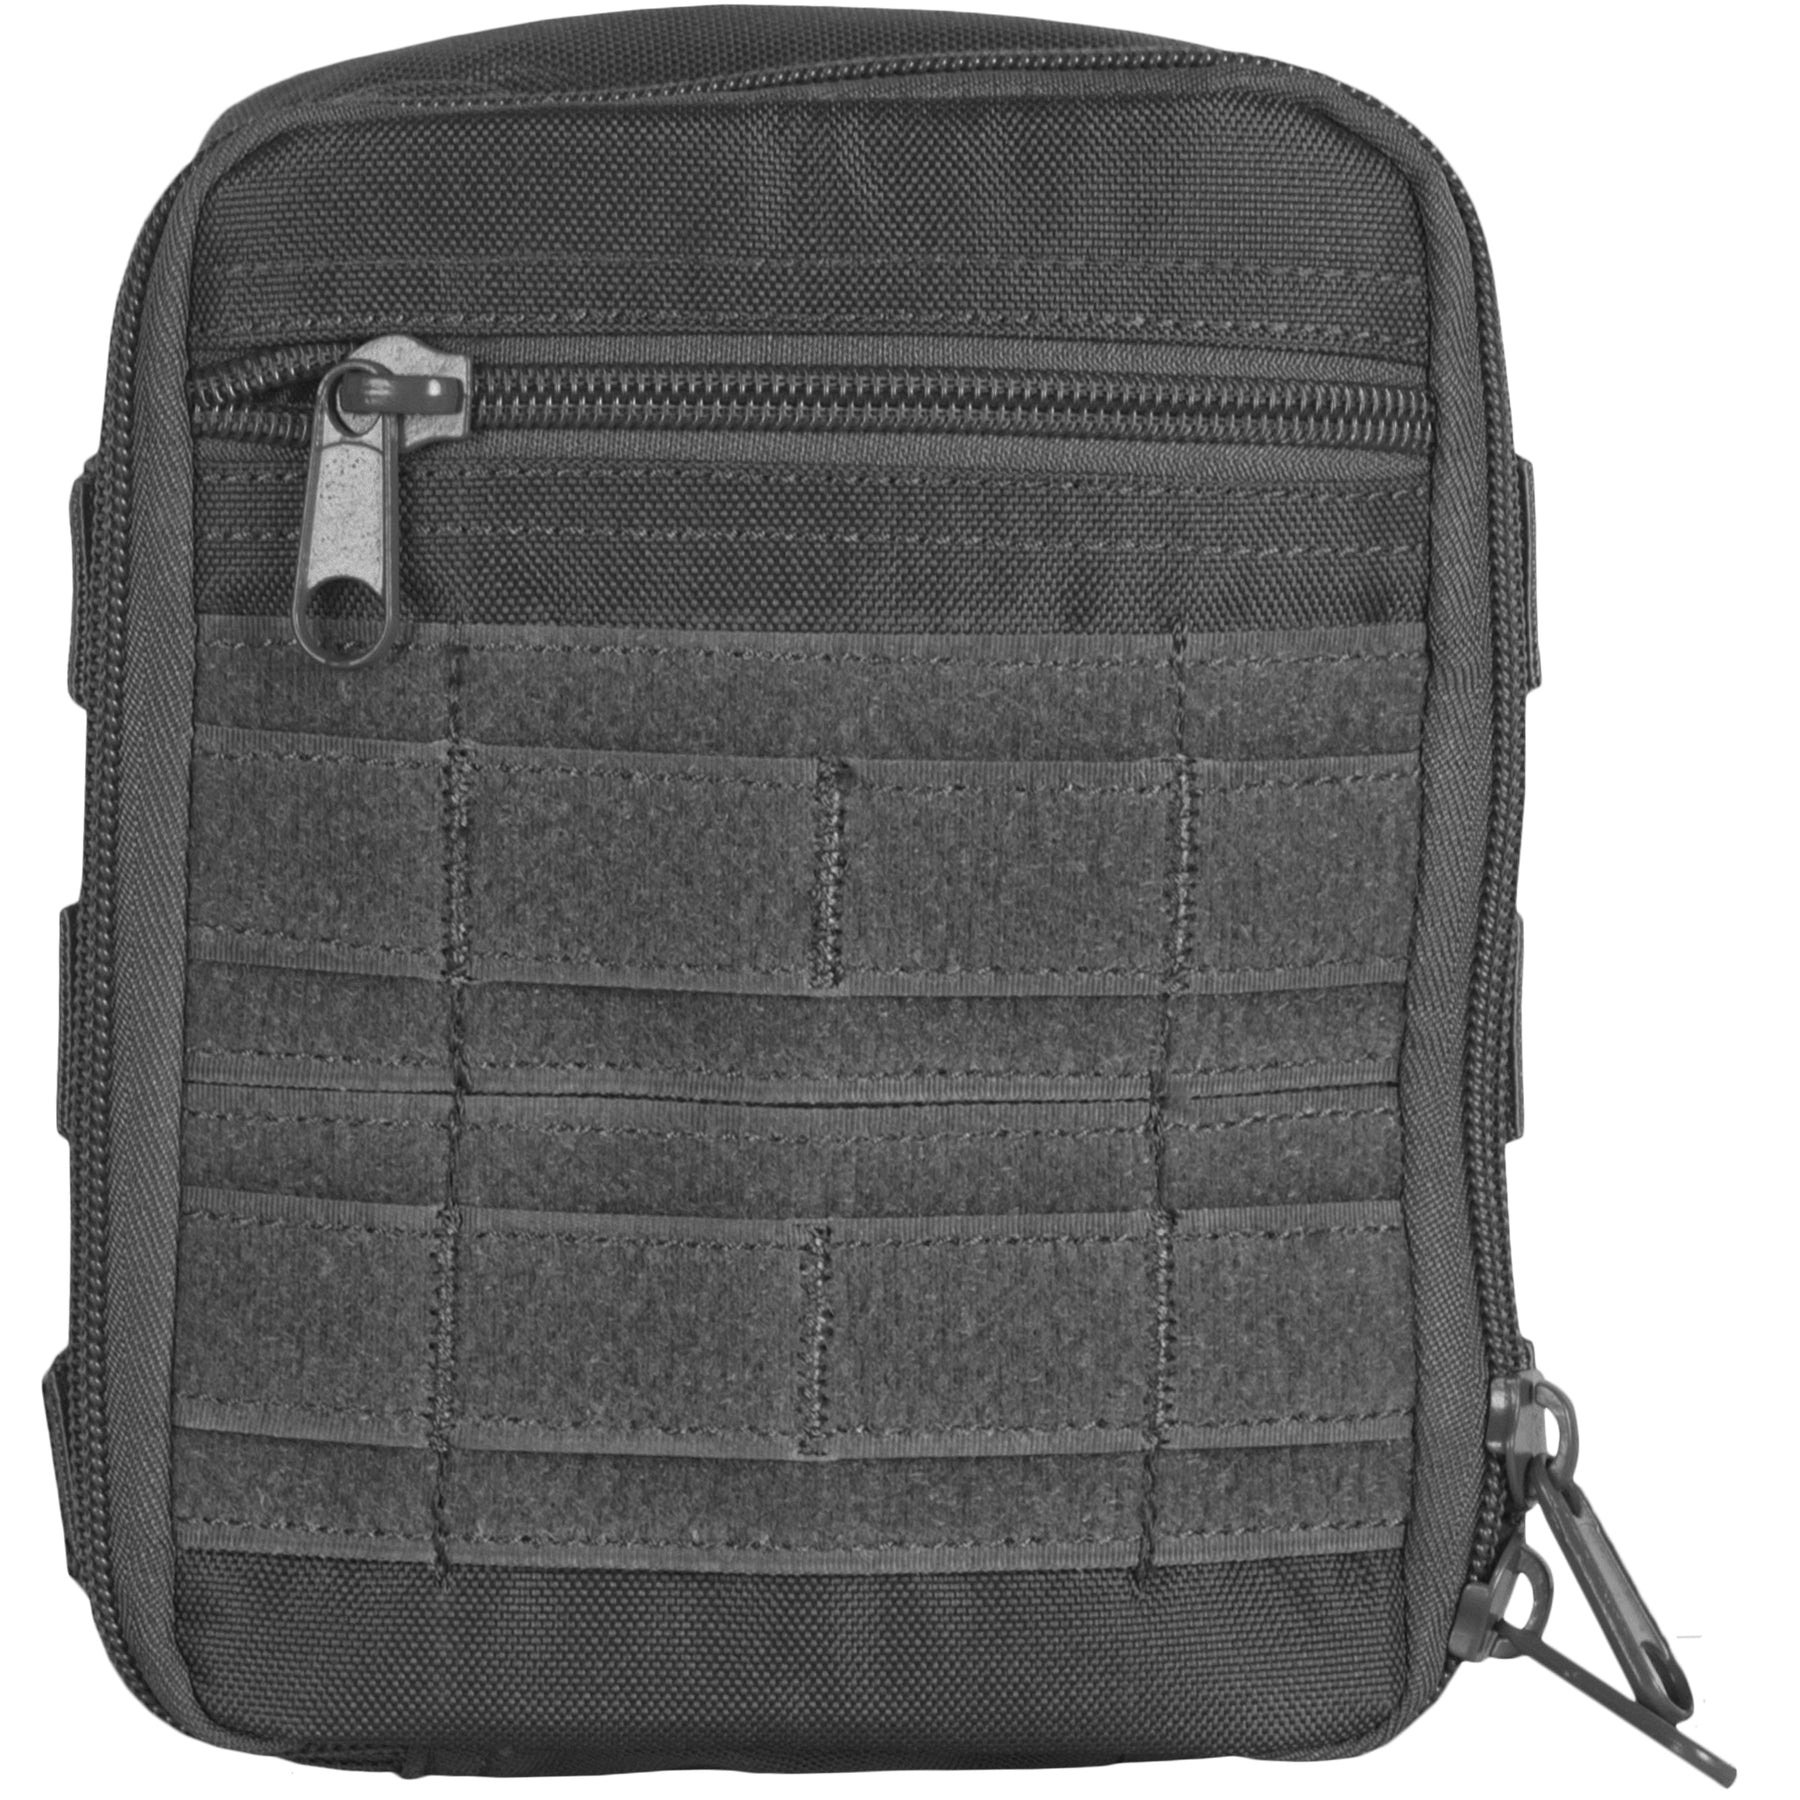 Multi-Field Tool and Accessory Pouch. 56-281